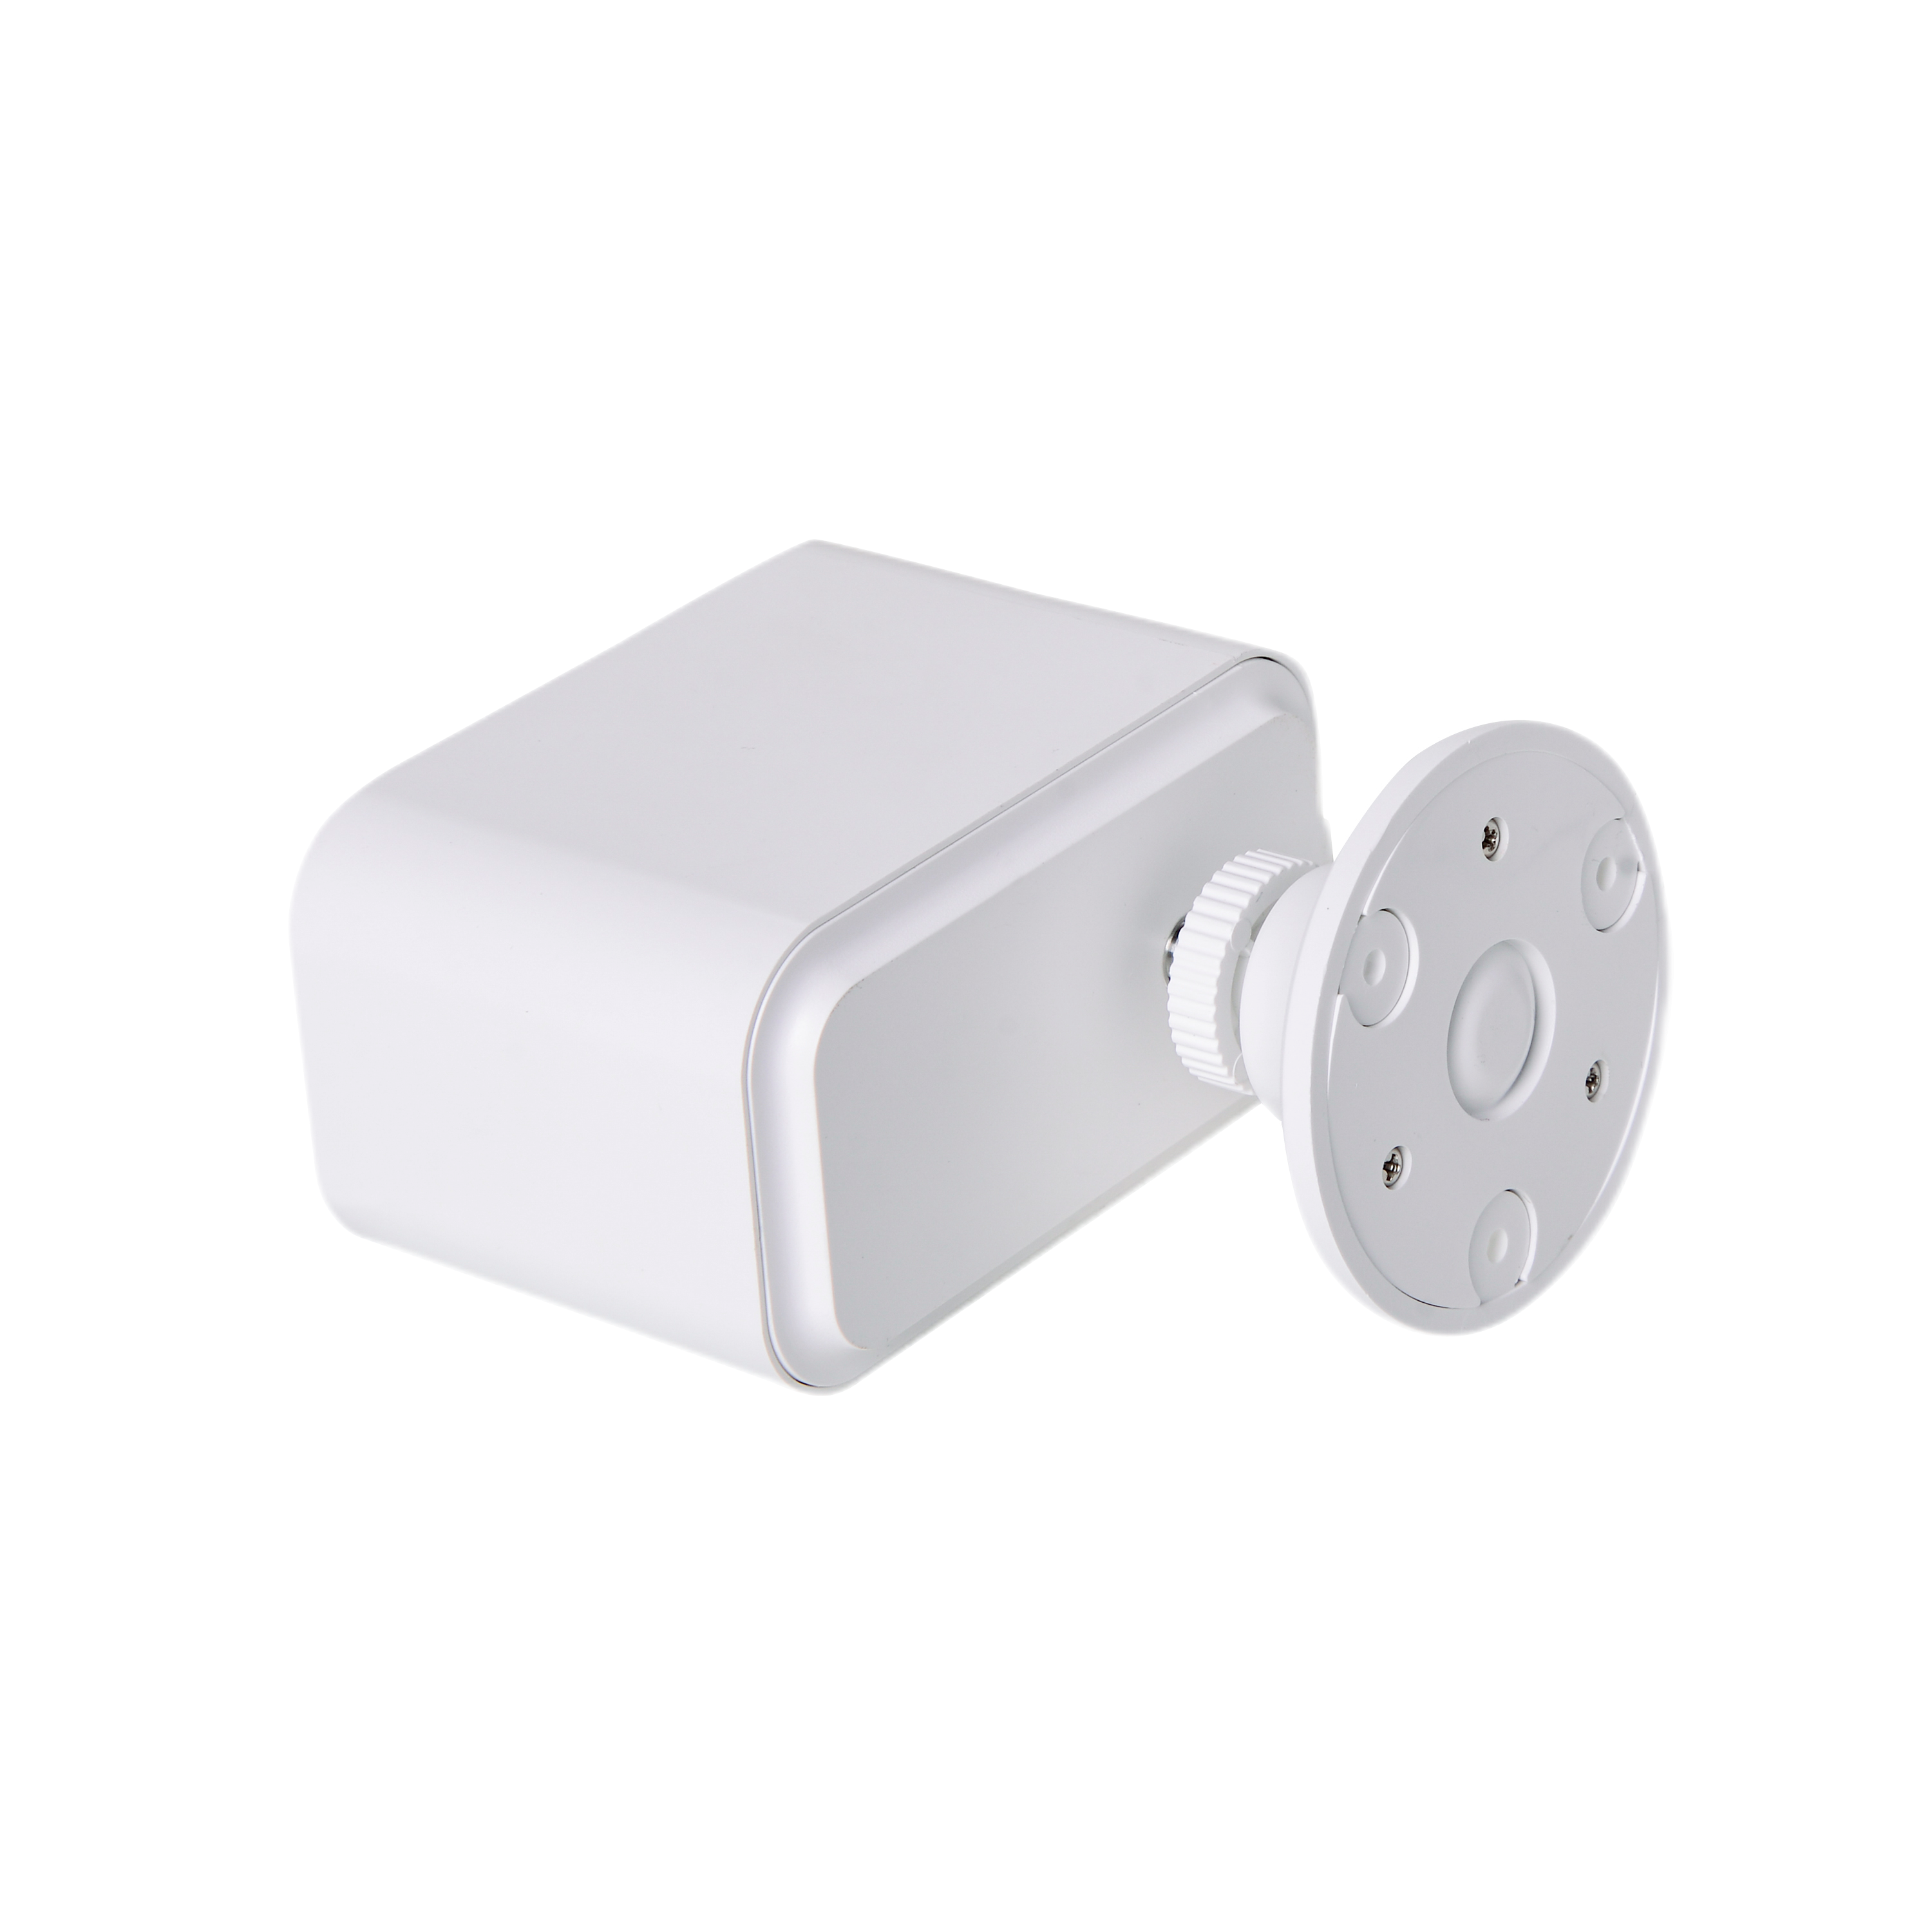 Baybot Live Wirefree - Wireless WiFi camera, upto 6 months battery backup, advanced motion detection, IP65 rated